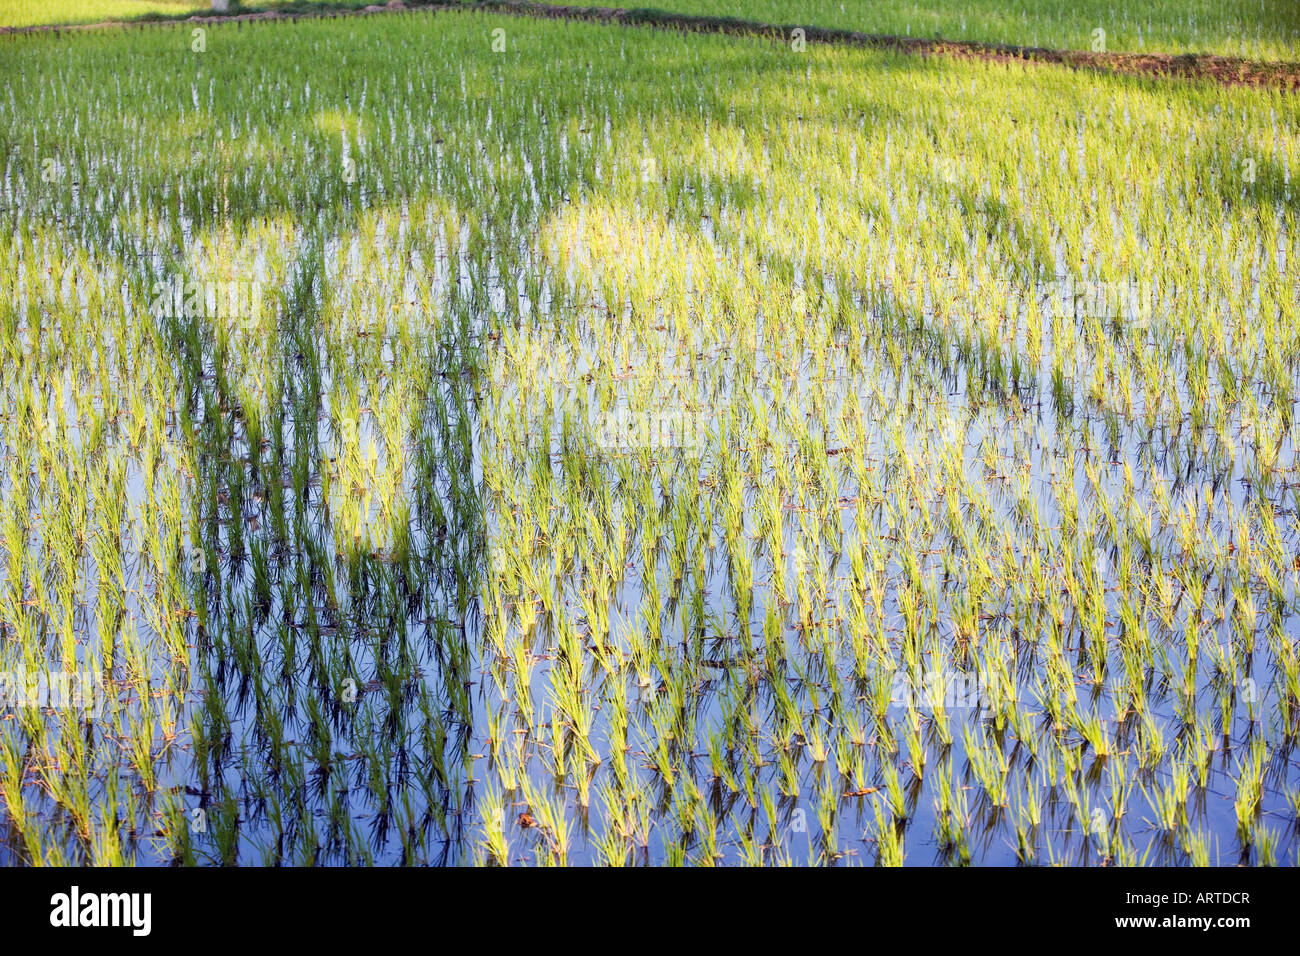 Oryza sativa. Tree shadow on a freshly planted rice paddy in India Stock Photo